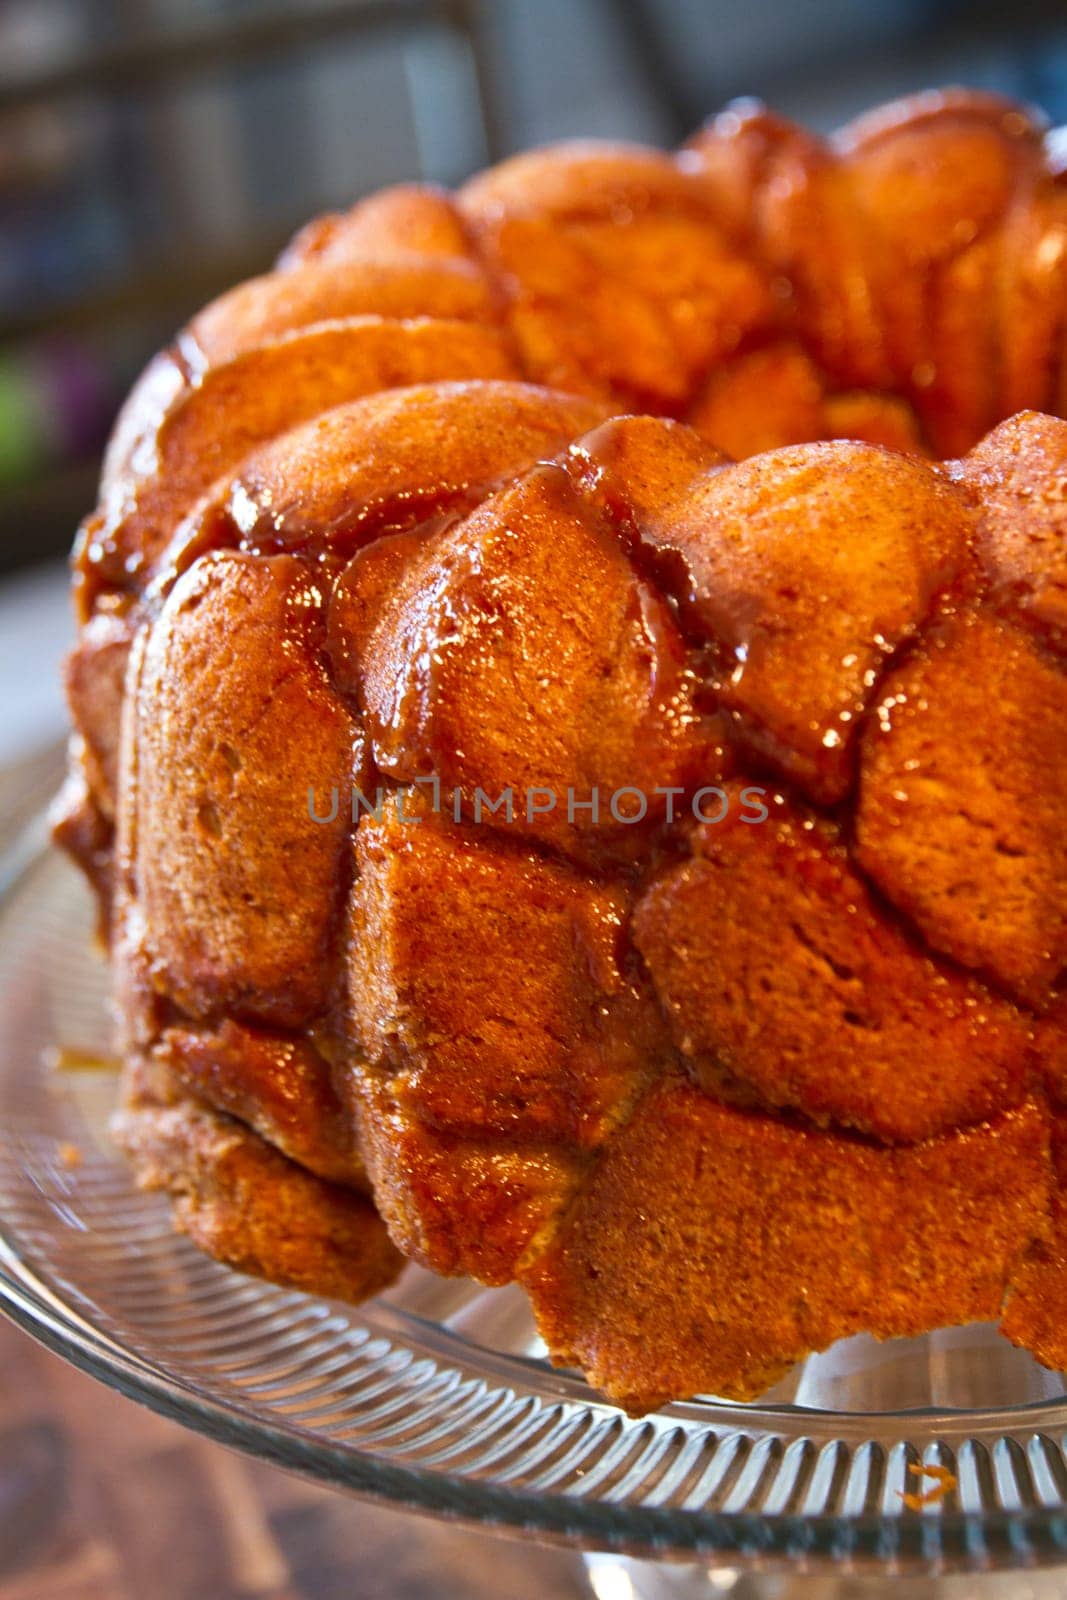 Glistening Golden Monkey Bread on Glass Stand in Cozy Kitchen Setting by njproductions